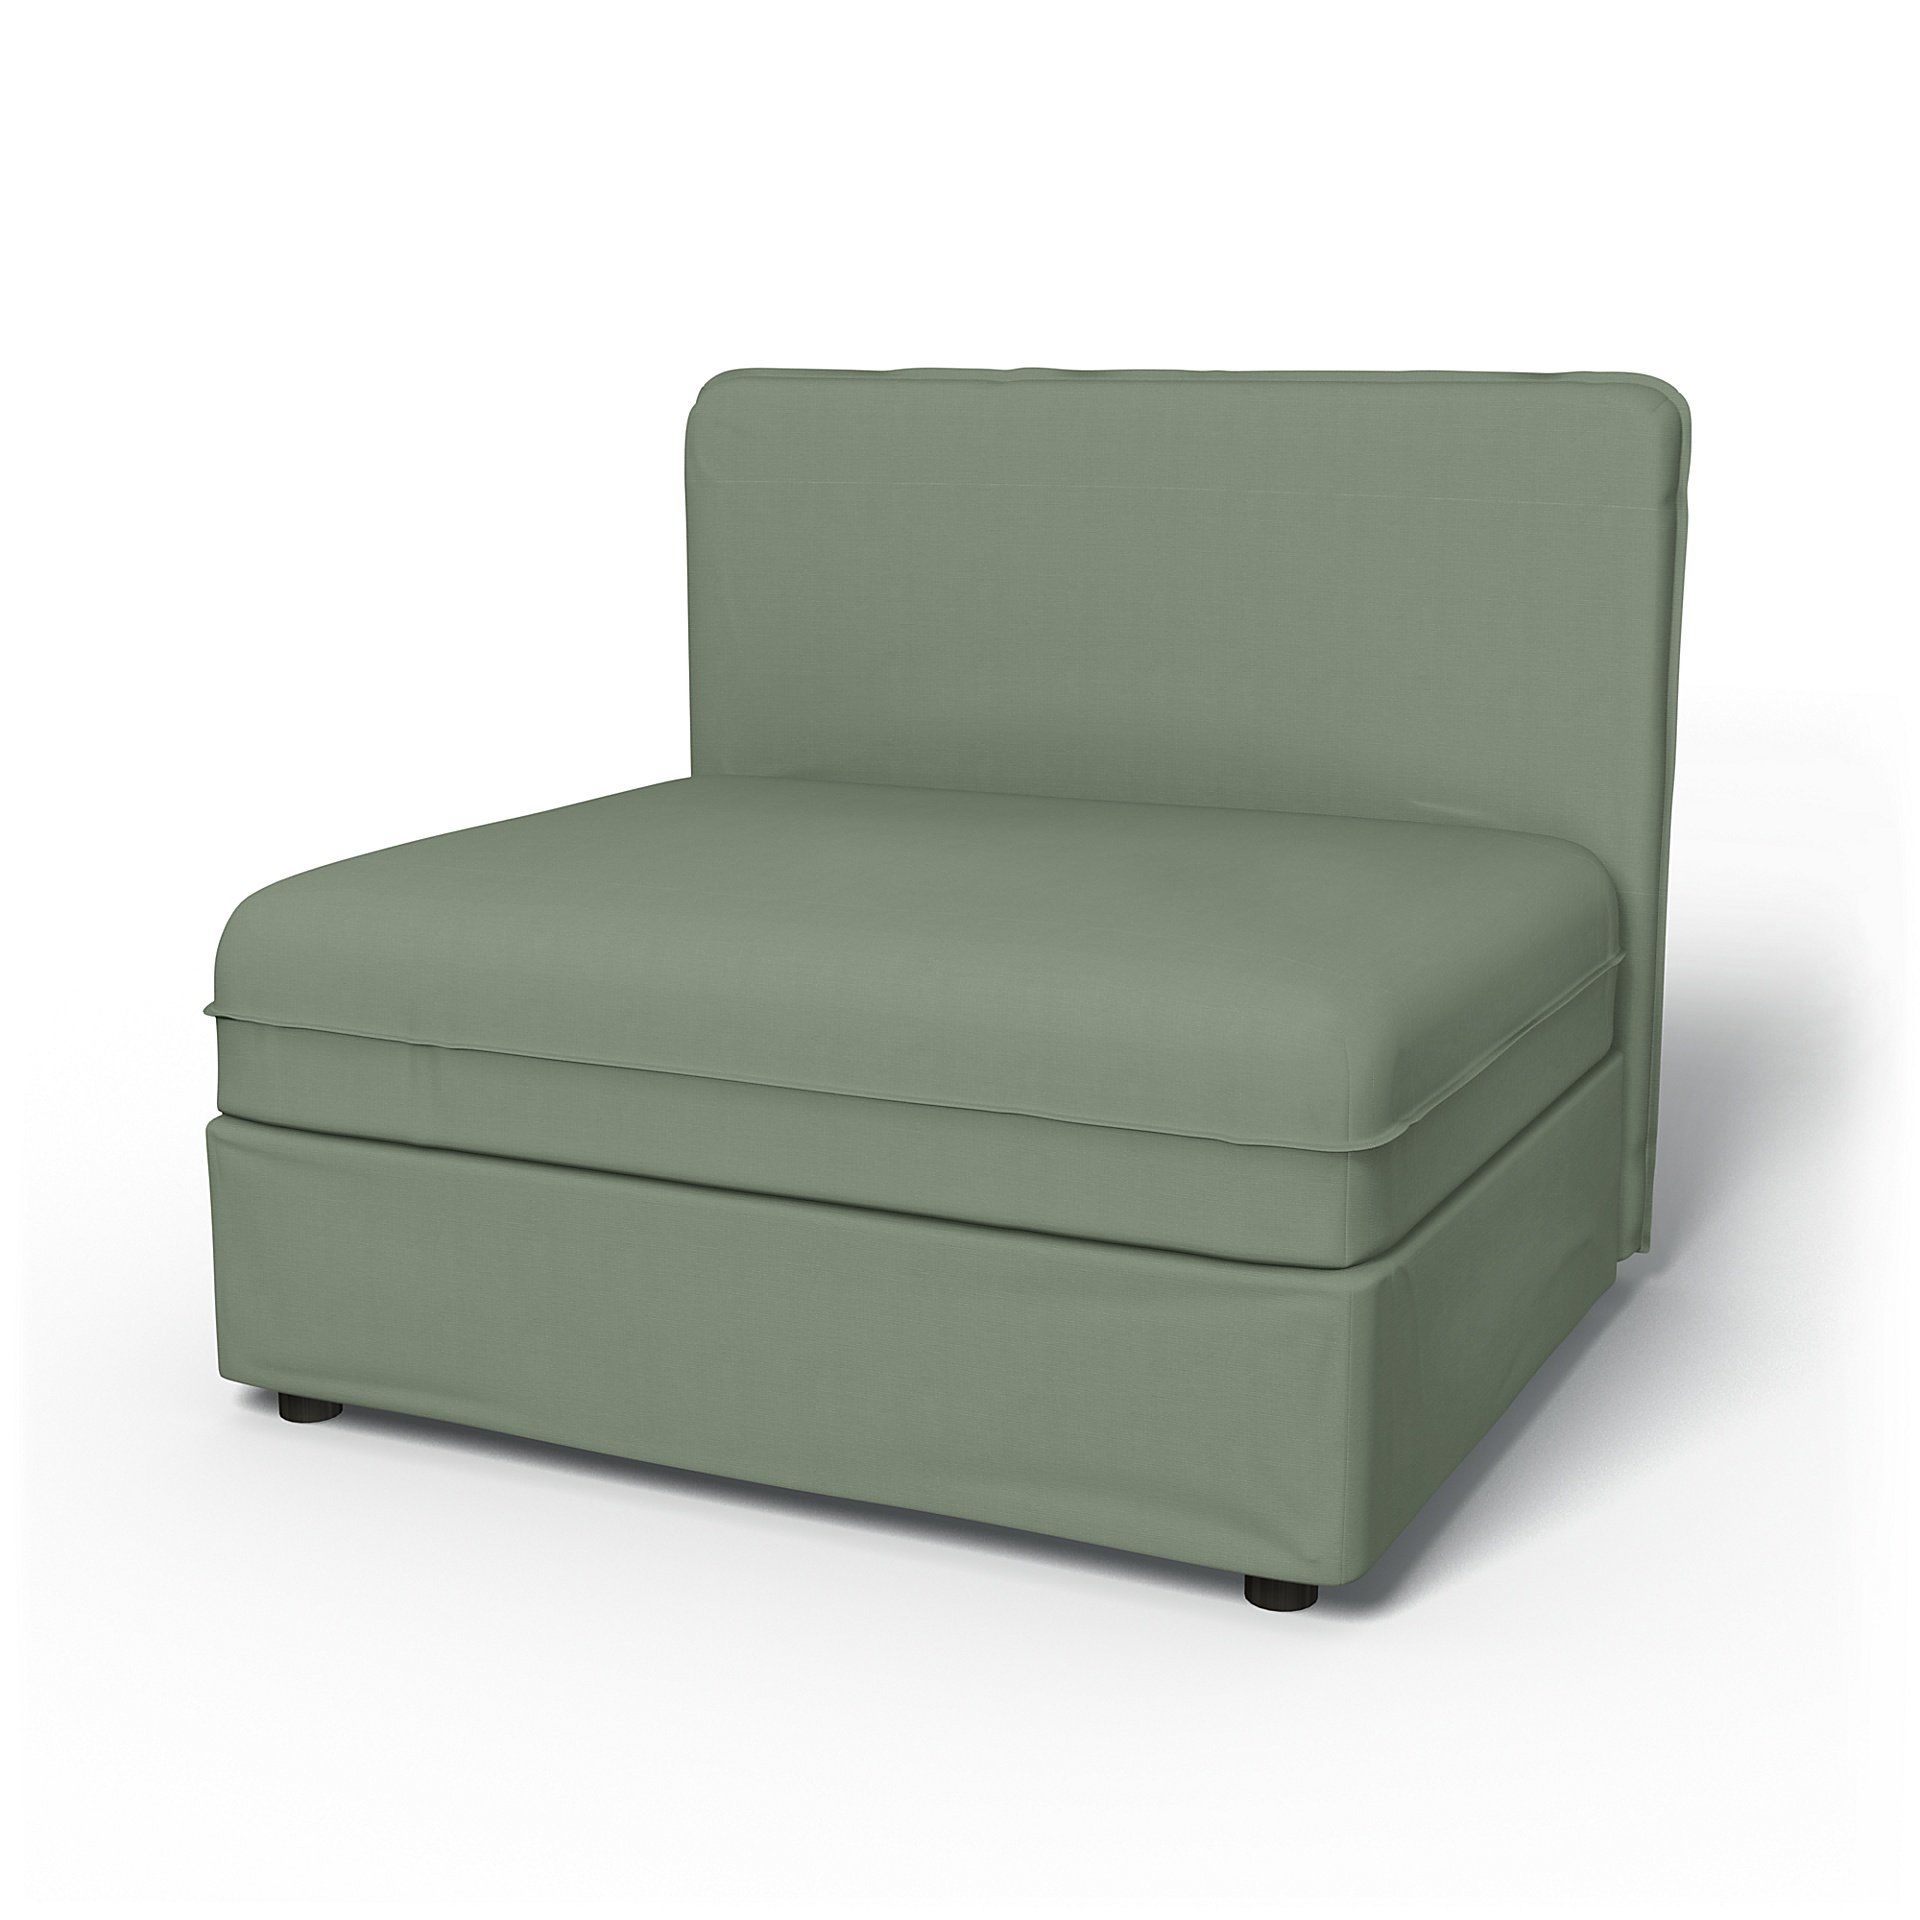 IKEA - Vallentuna Seat Module with Low Back Cover 100x80cm 39x32in, Seagrass, Cotton - Bemz